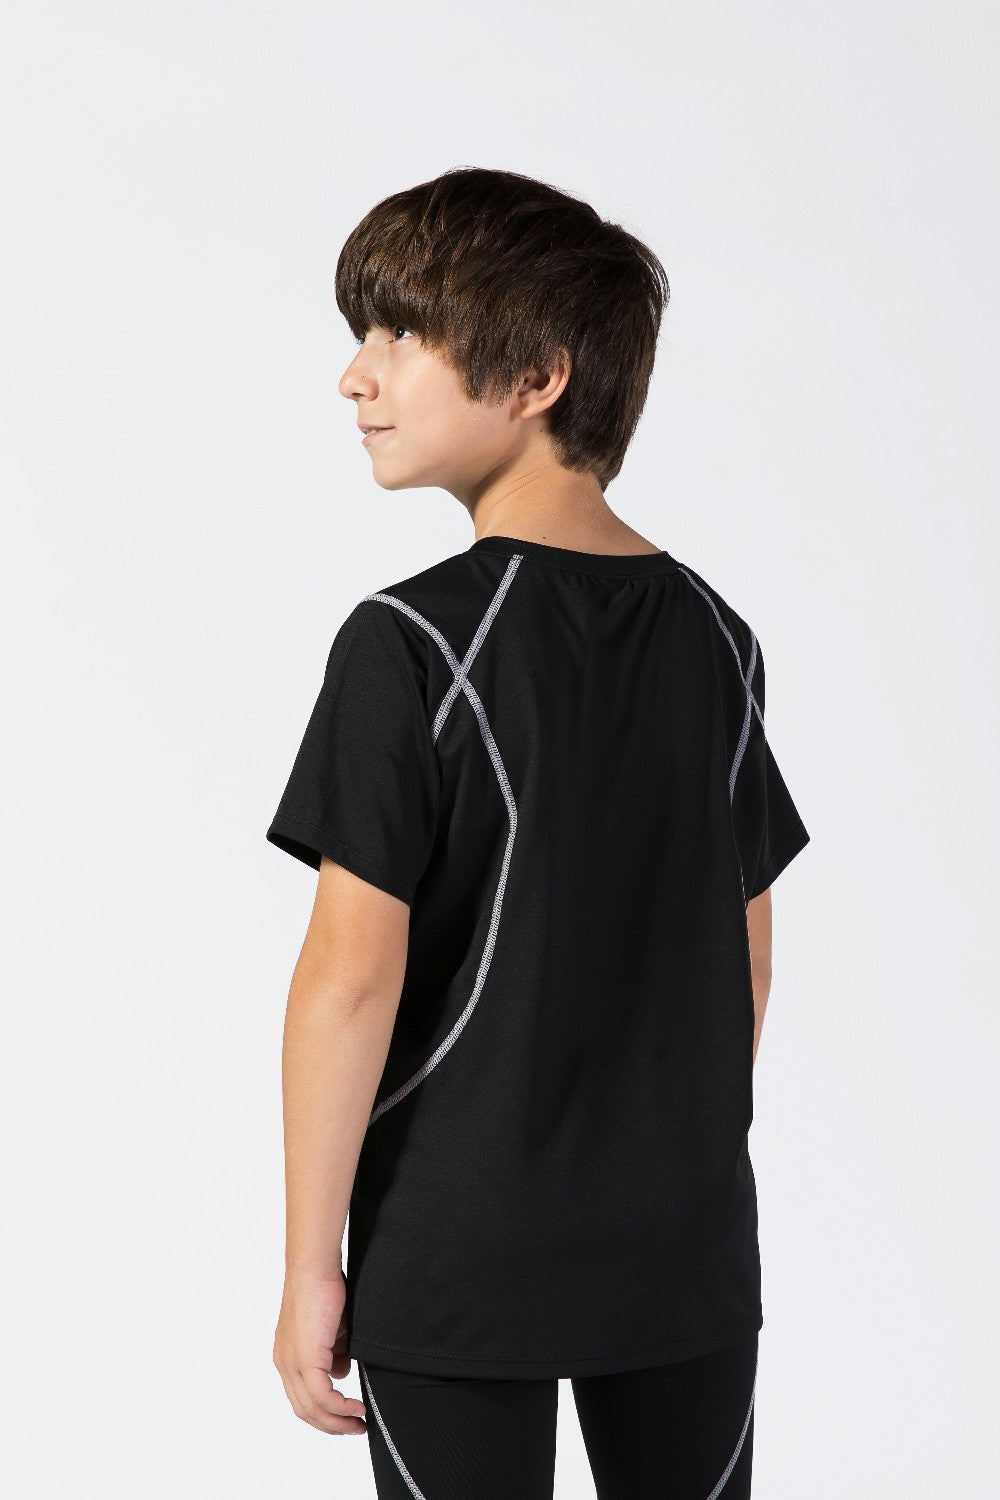 Youth Boys Sports Active Workout Short Sleeve Tech T-Shirts Performance Crew Neck Top LANBAOSI